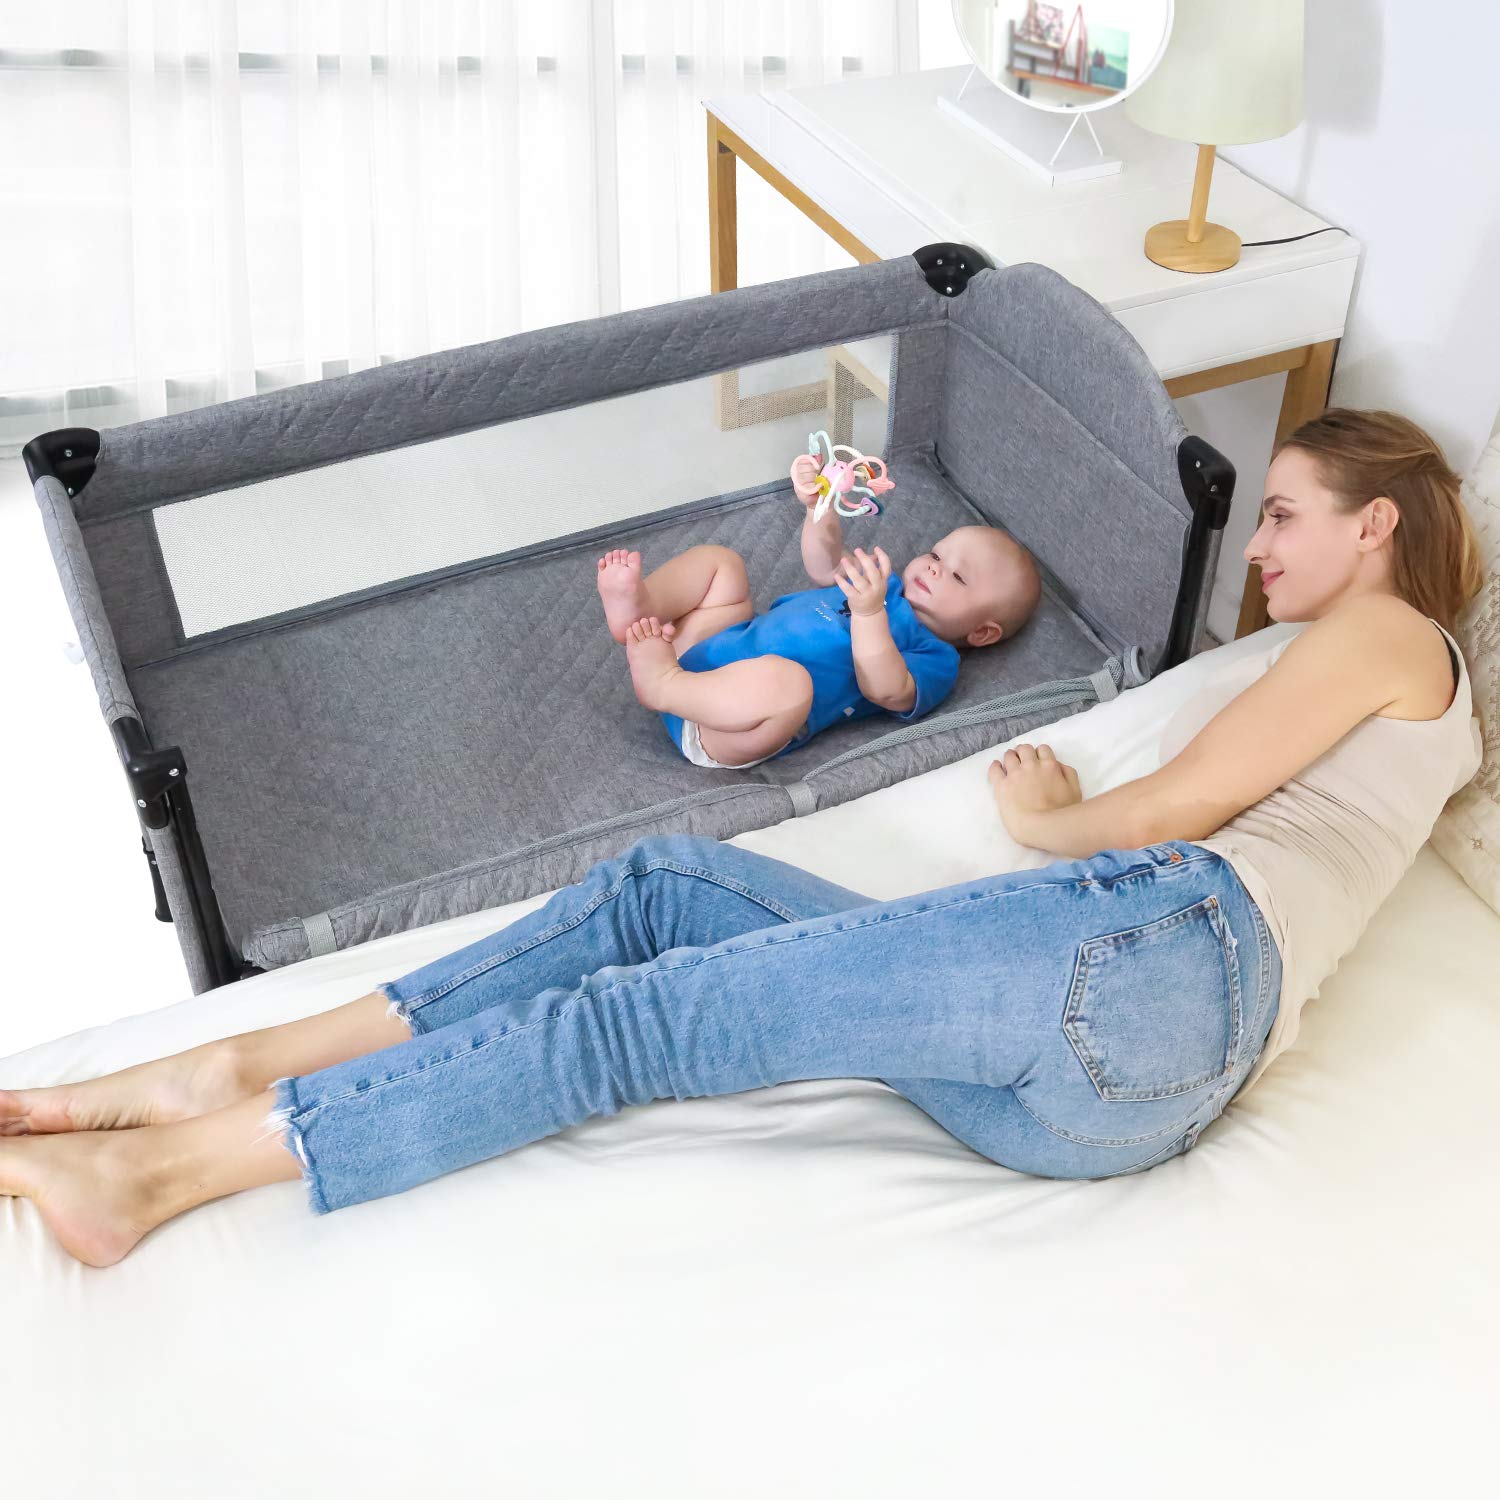 Angelbliss 4 in 1 Baby Beside Sleeper Bassinet|Portable Crib | Baby Playards Easy Folding|Playpen Include Comfortable Mattress